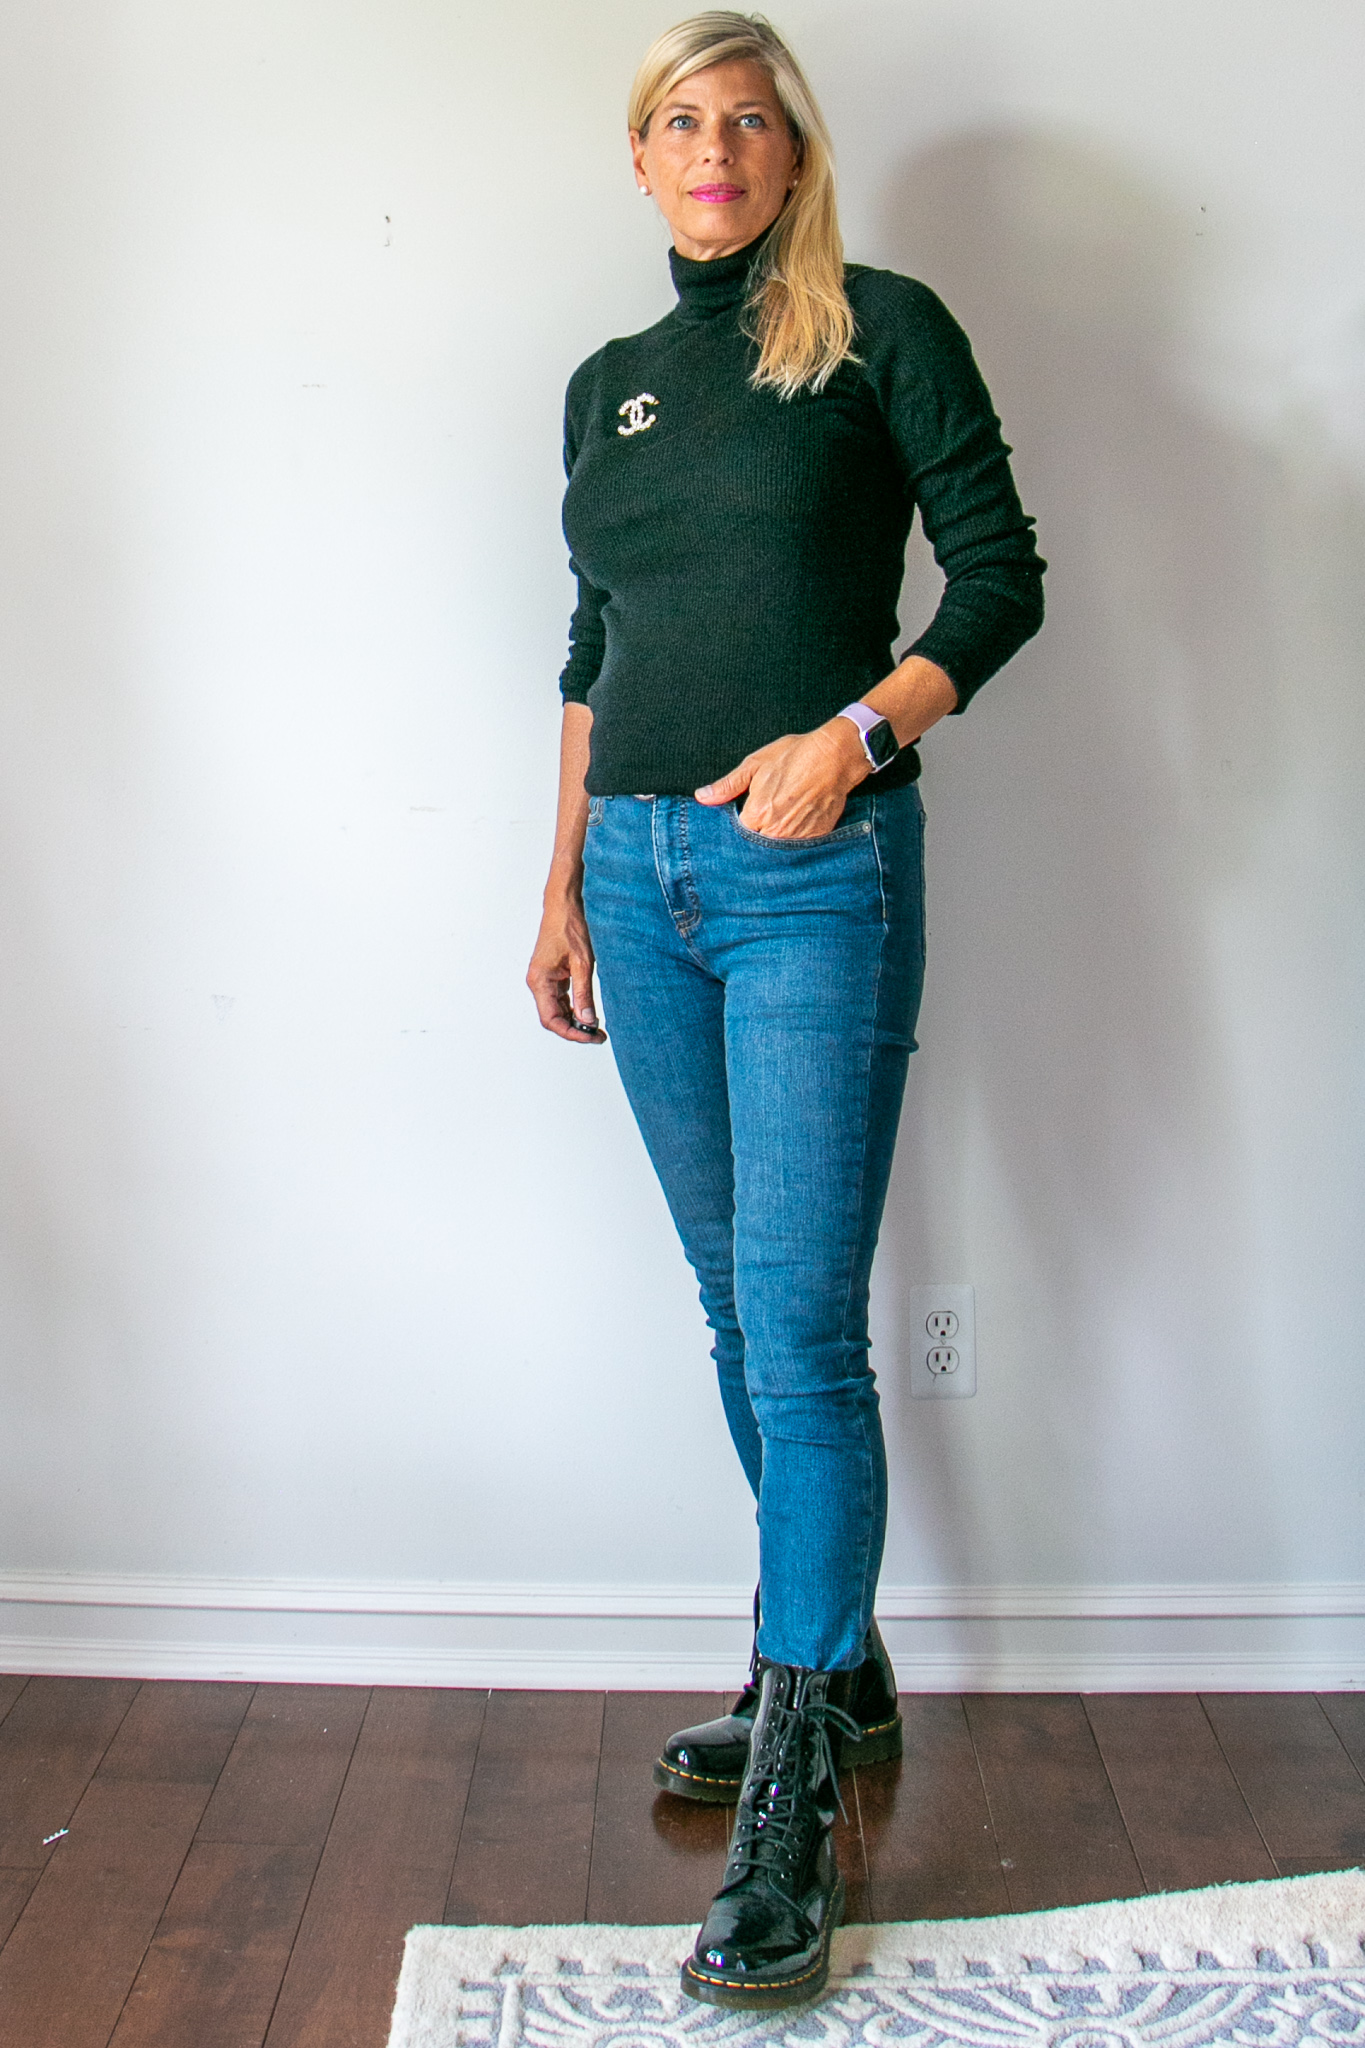 Black turtleneck sweater skinny jeans with boots